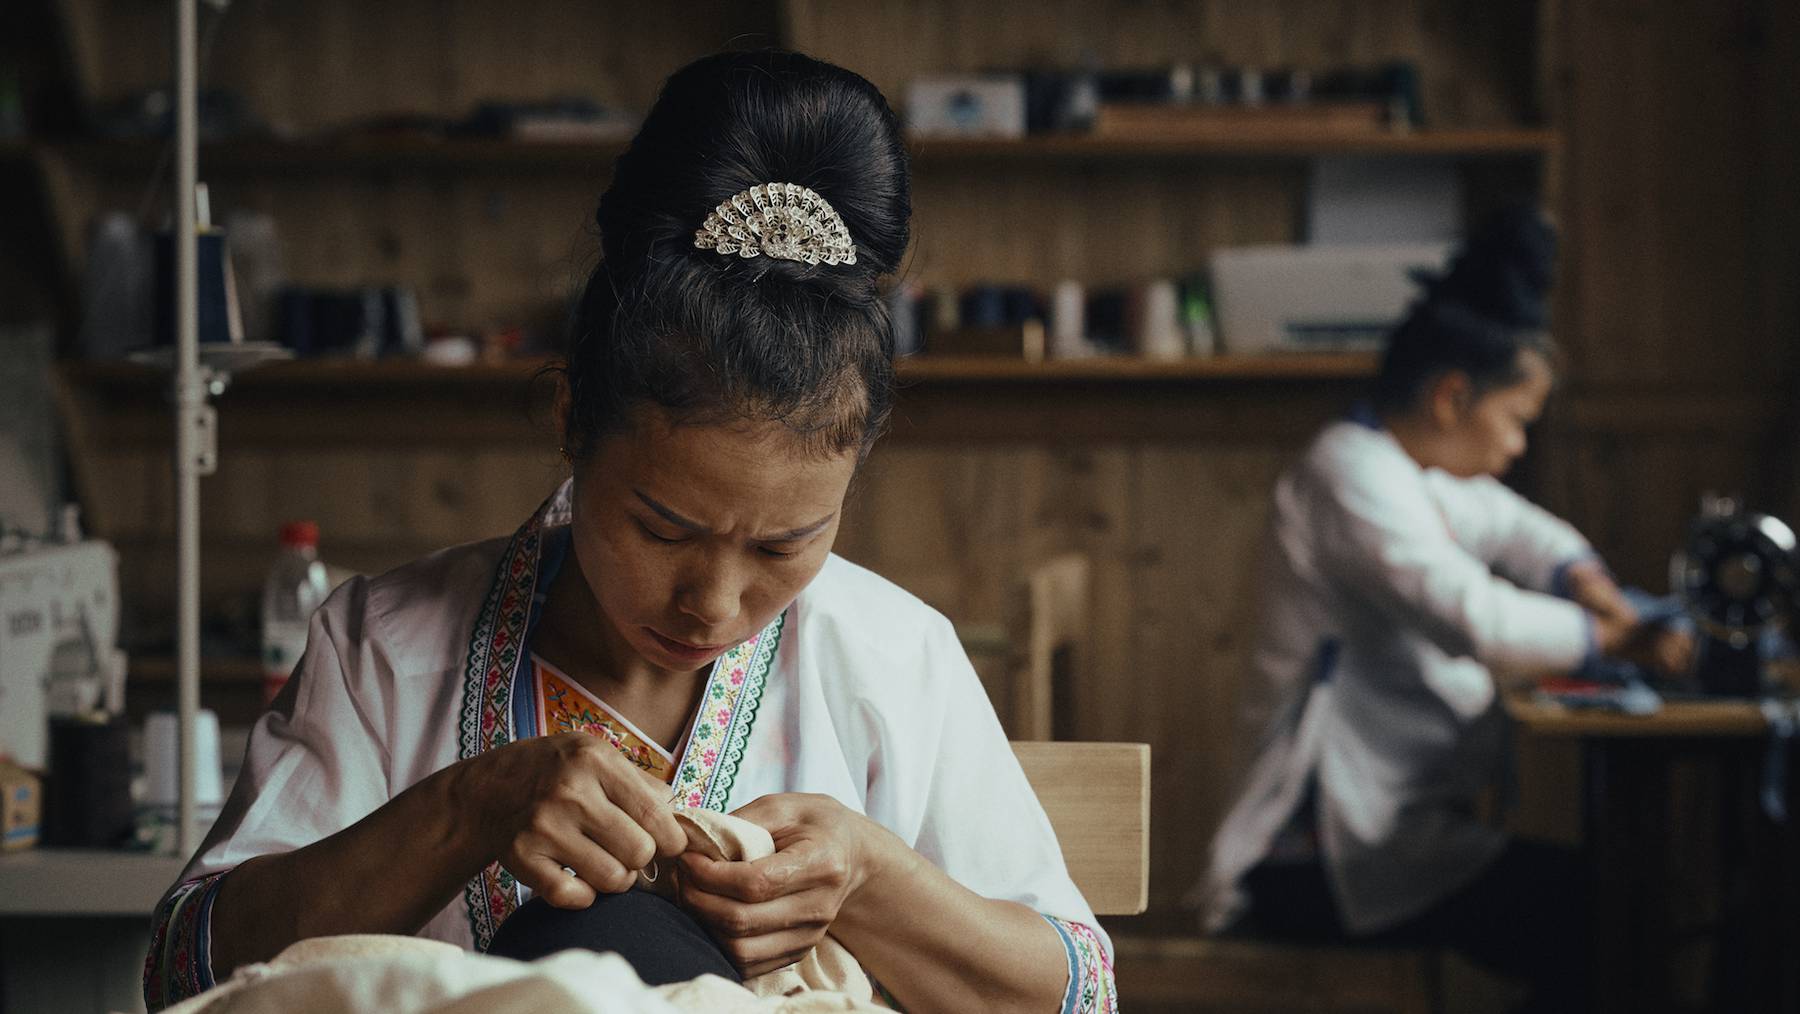 Designer Angel Chang works with indigenous artisans in rural China to produce her womenswear line.